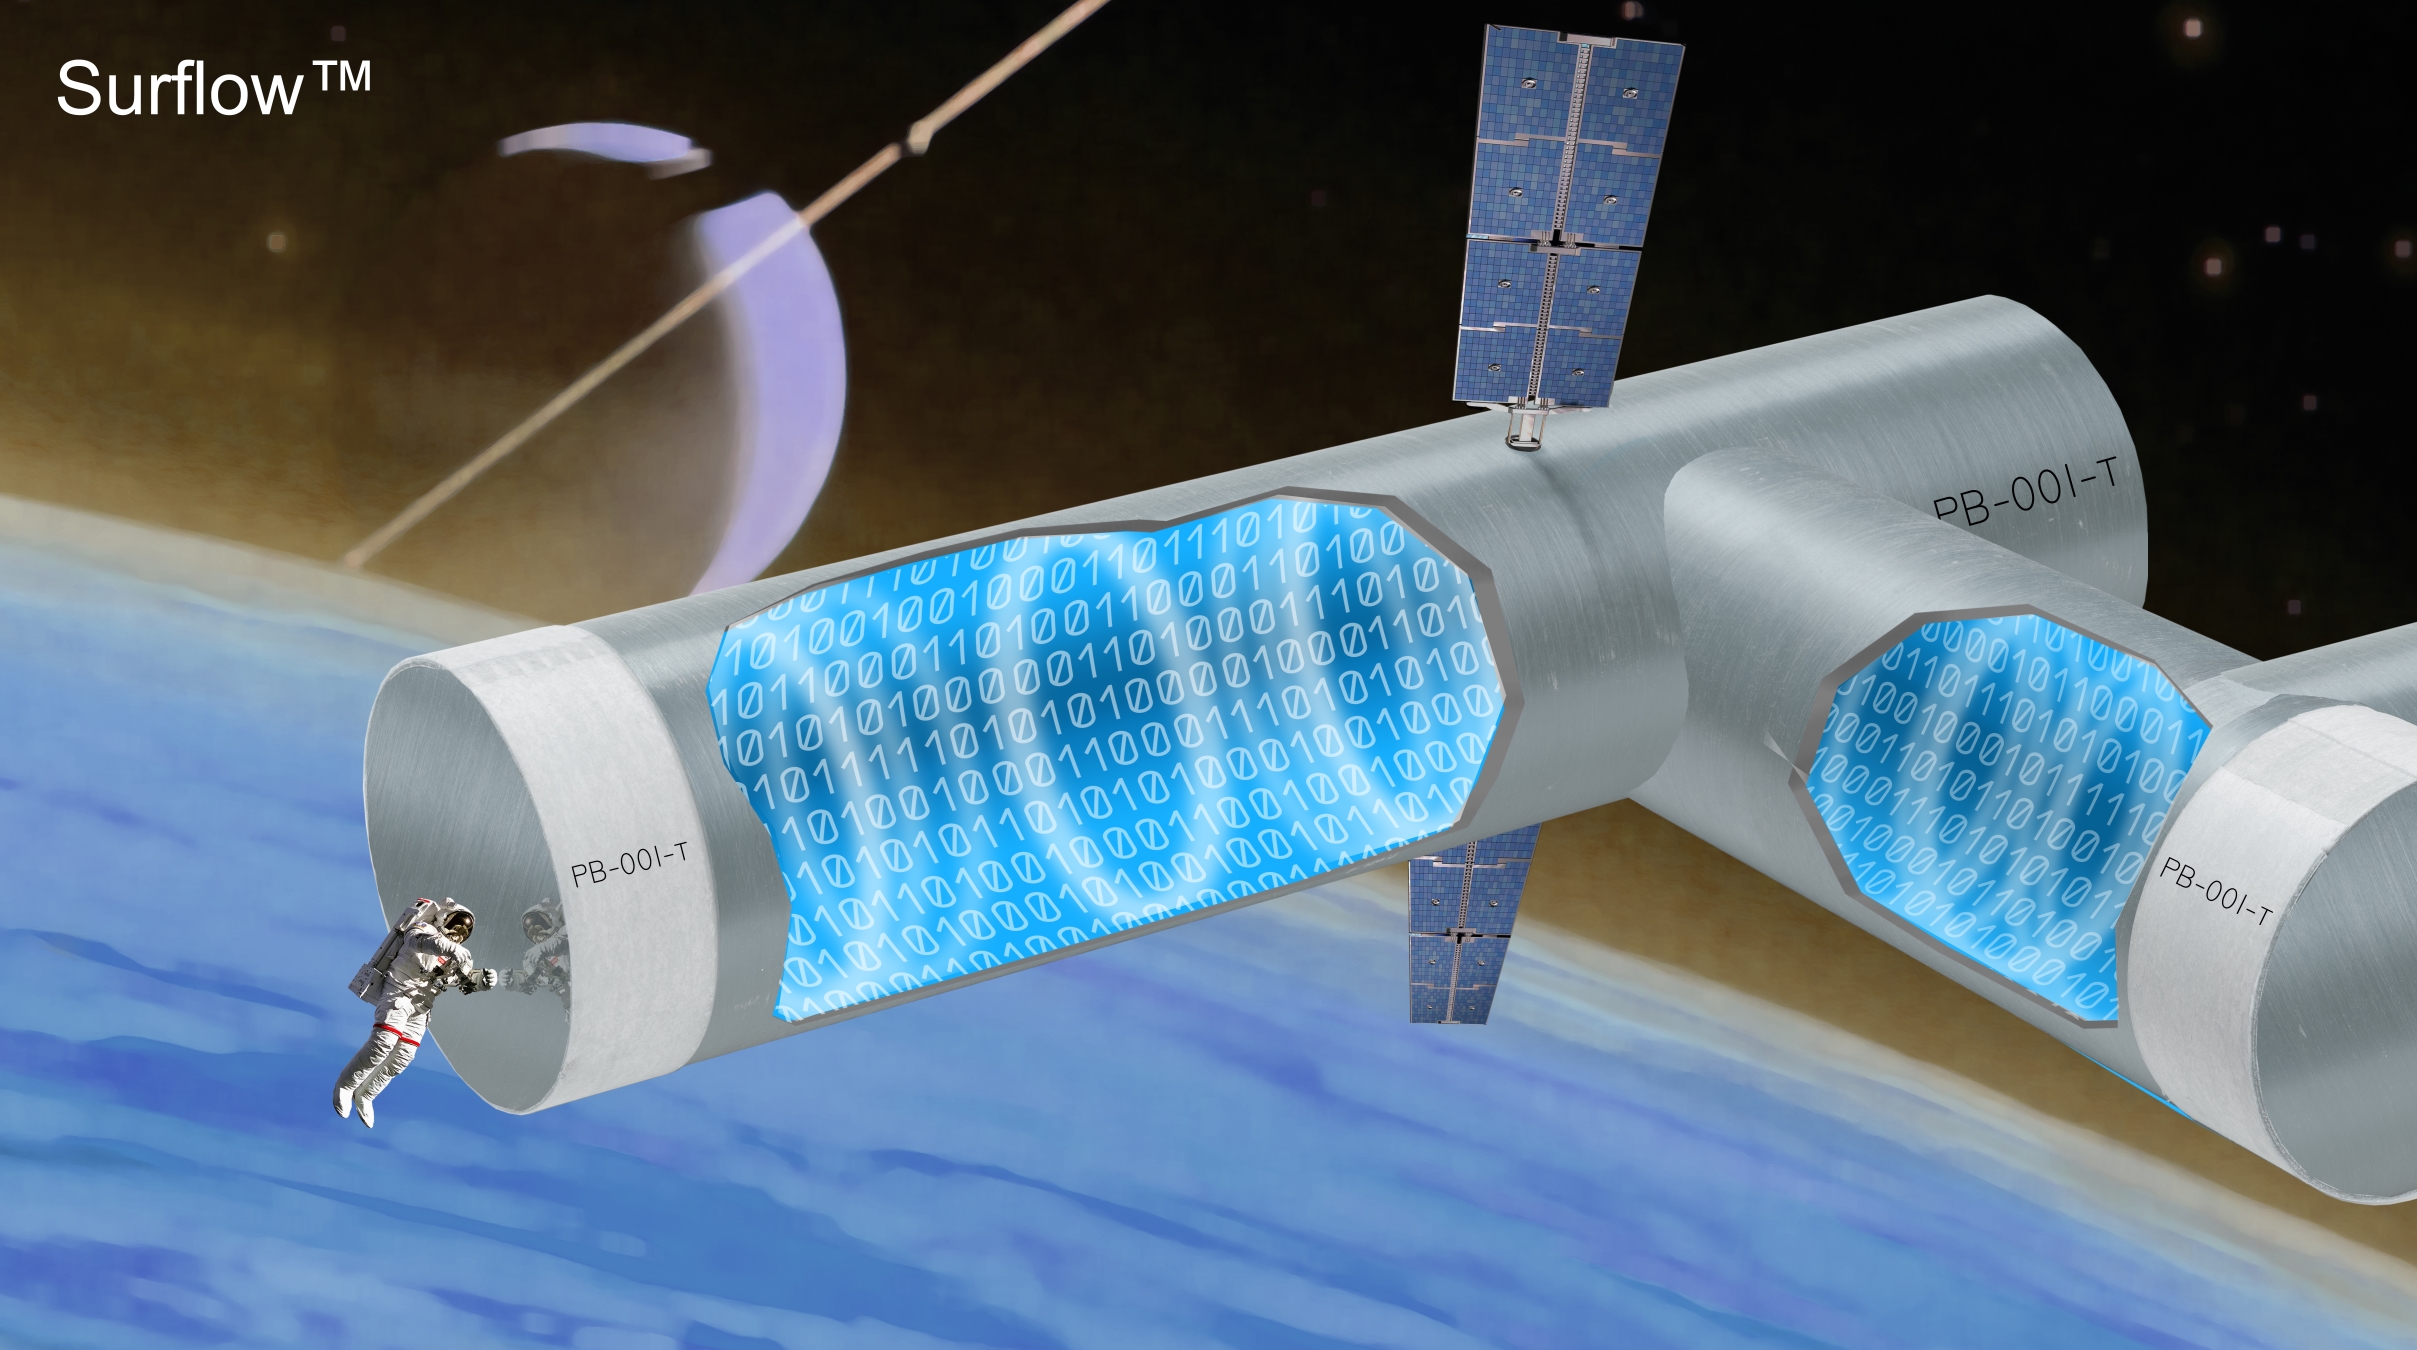 An artist's impression of SurFlow being used in an advanced aerospace application